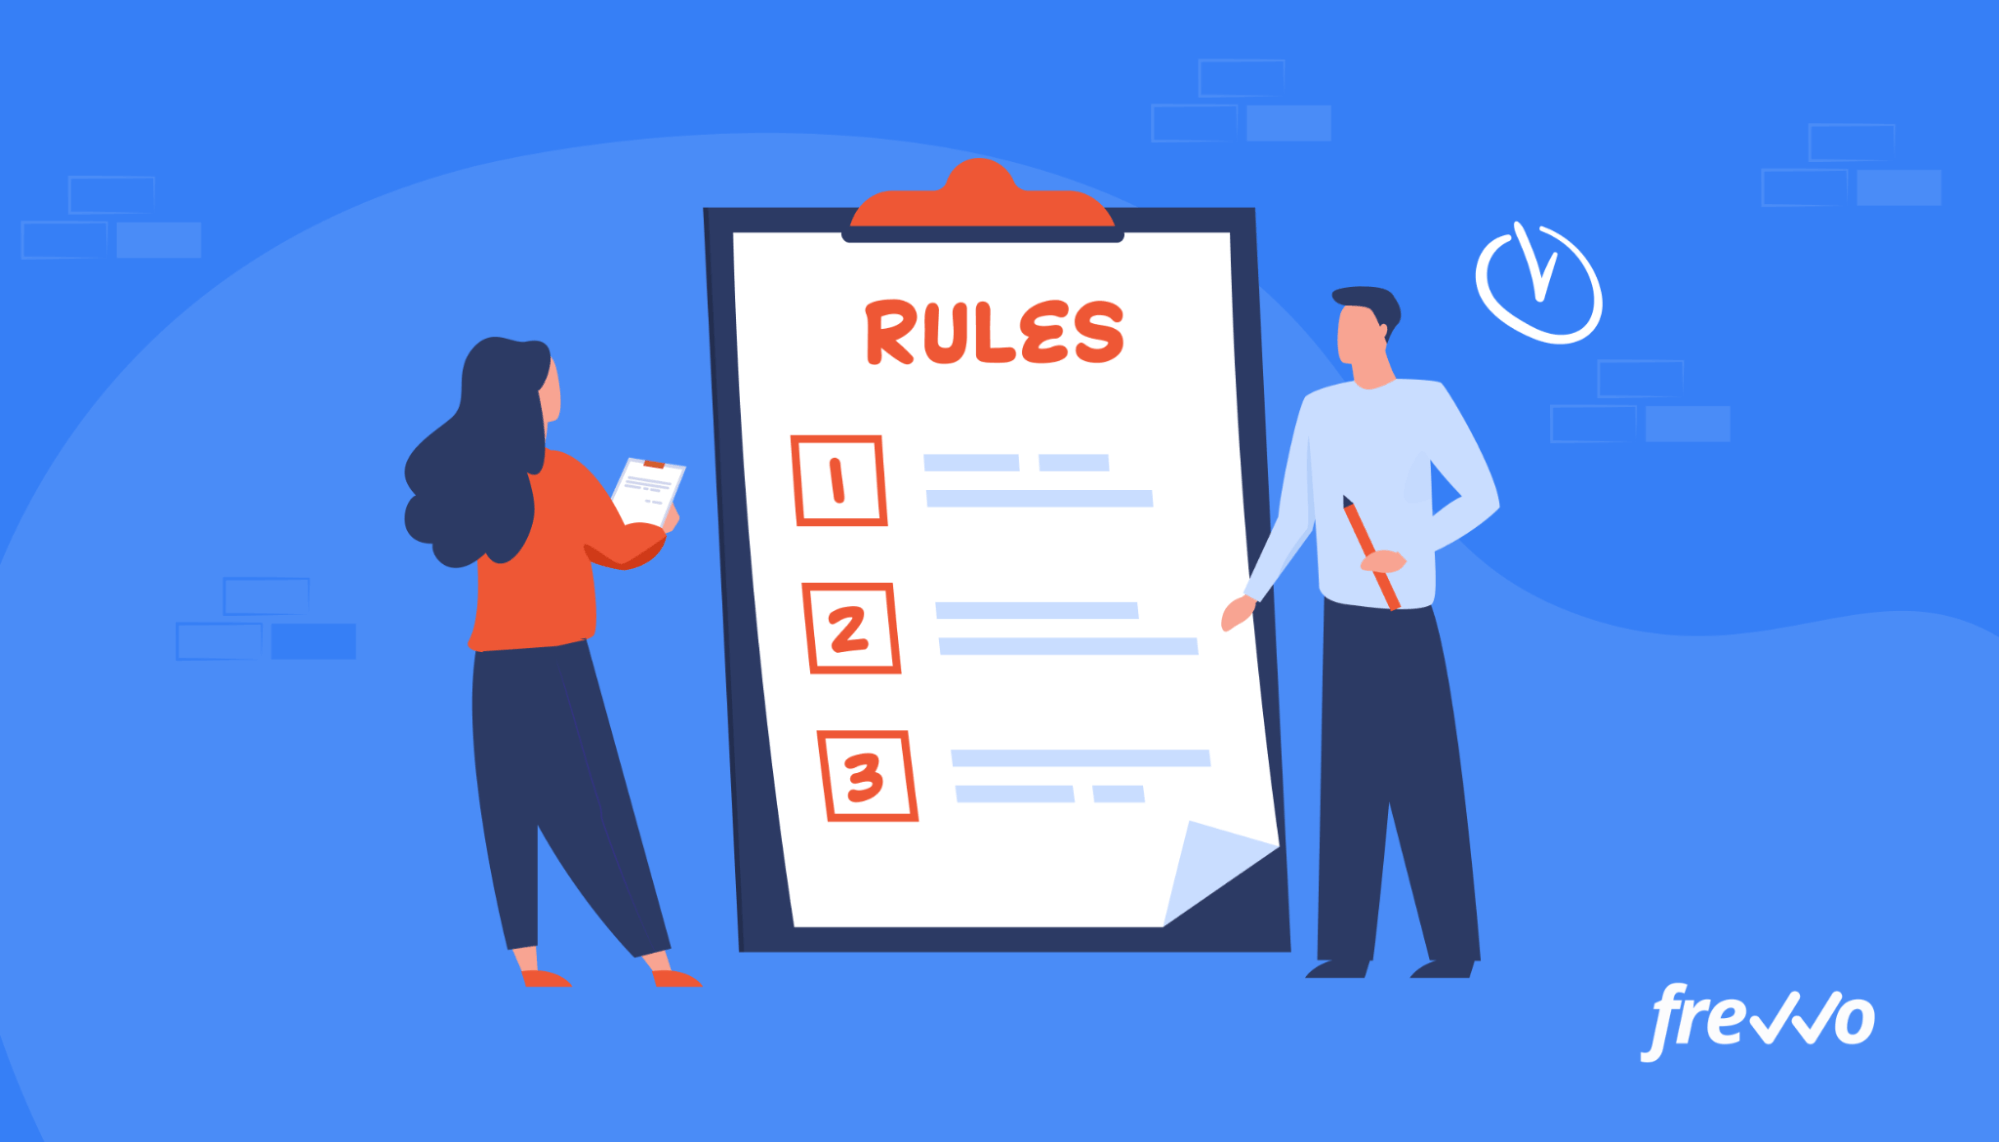 10 Examples of Business Rules That Make Work More Efficient - frevvo Blog